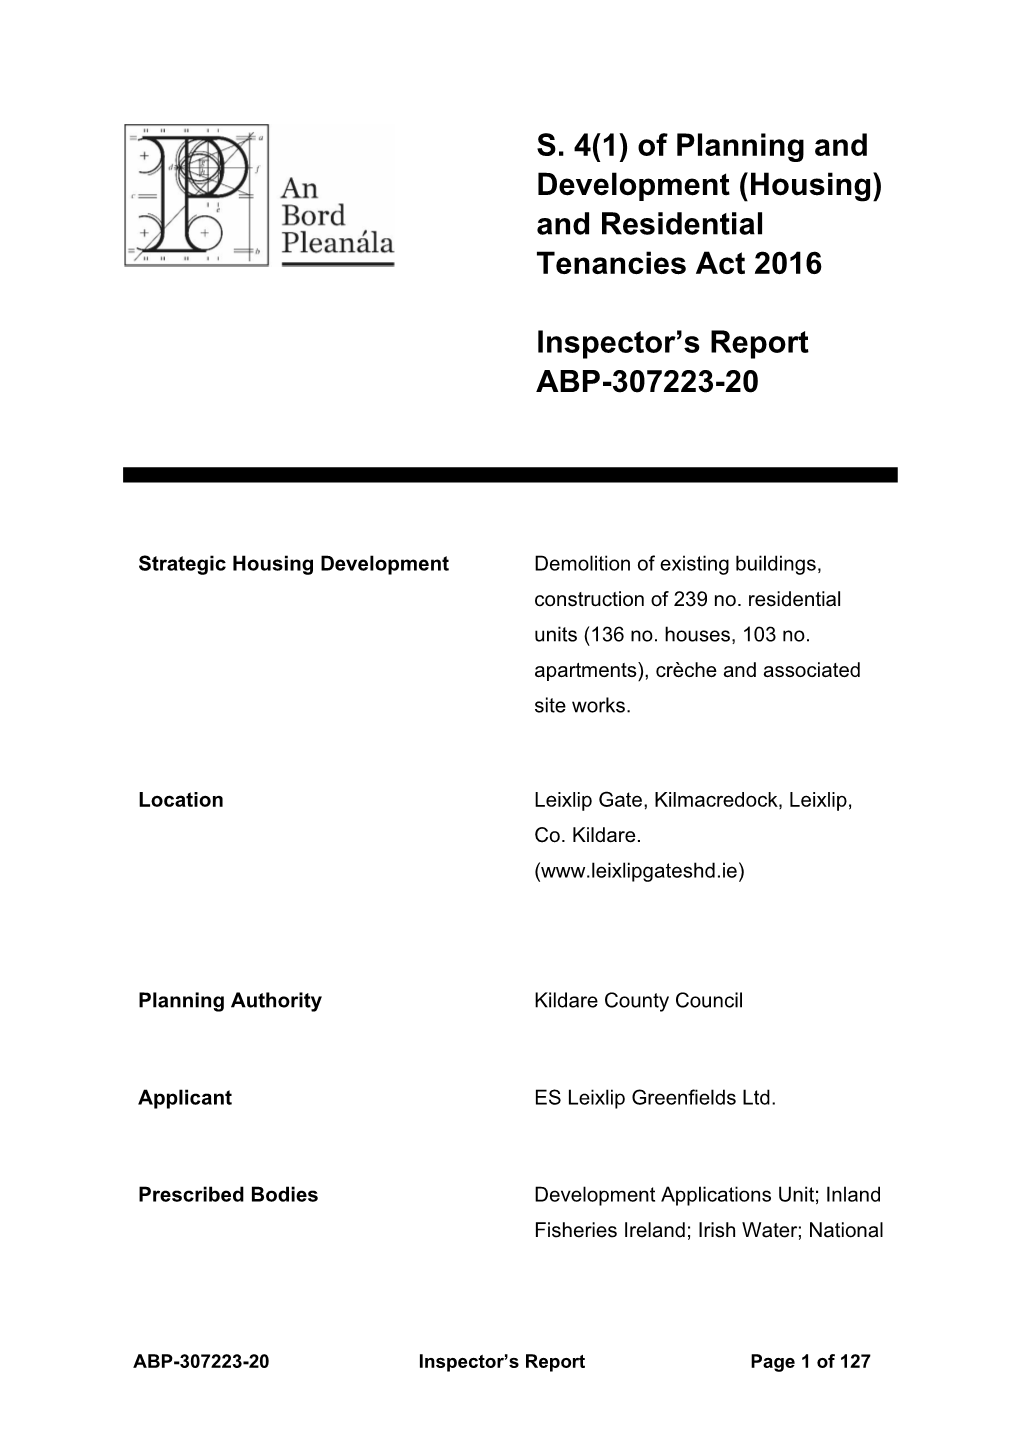 And Residential Tenancies Act 2016 Inspector's Report ABP-307223-20